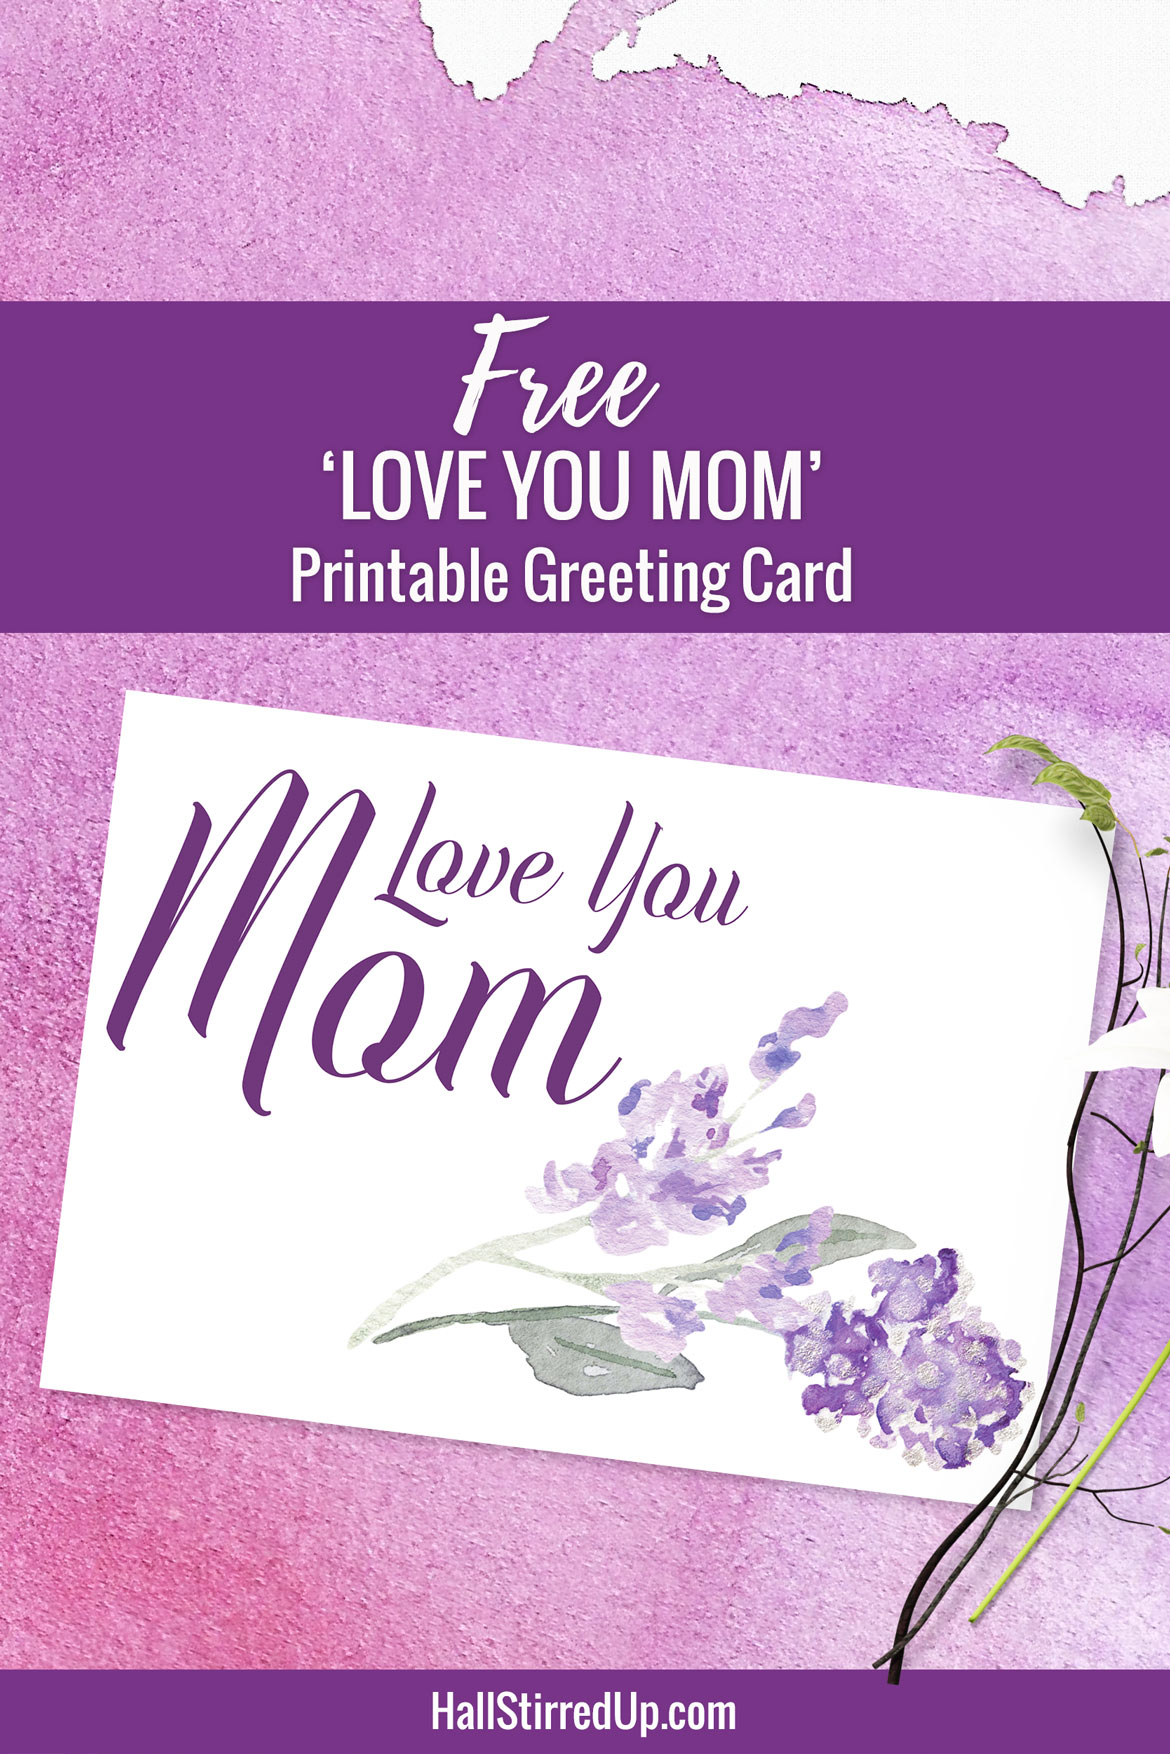 Happy Mother's Day and a free printable card for Mom